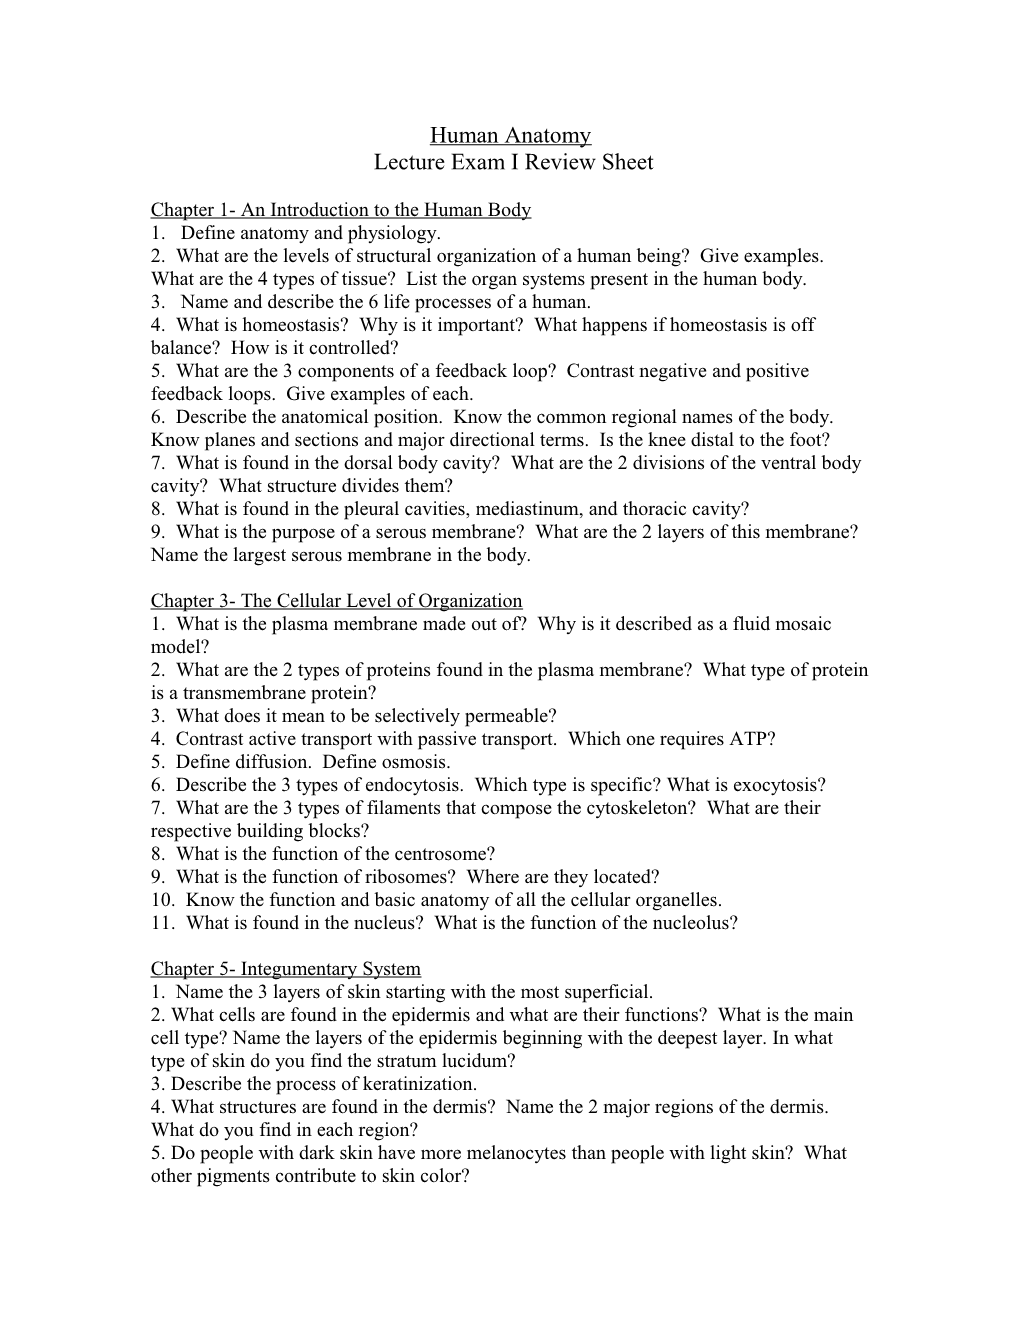 2401 Lecture Exam I Review Sheet